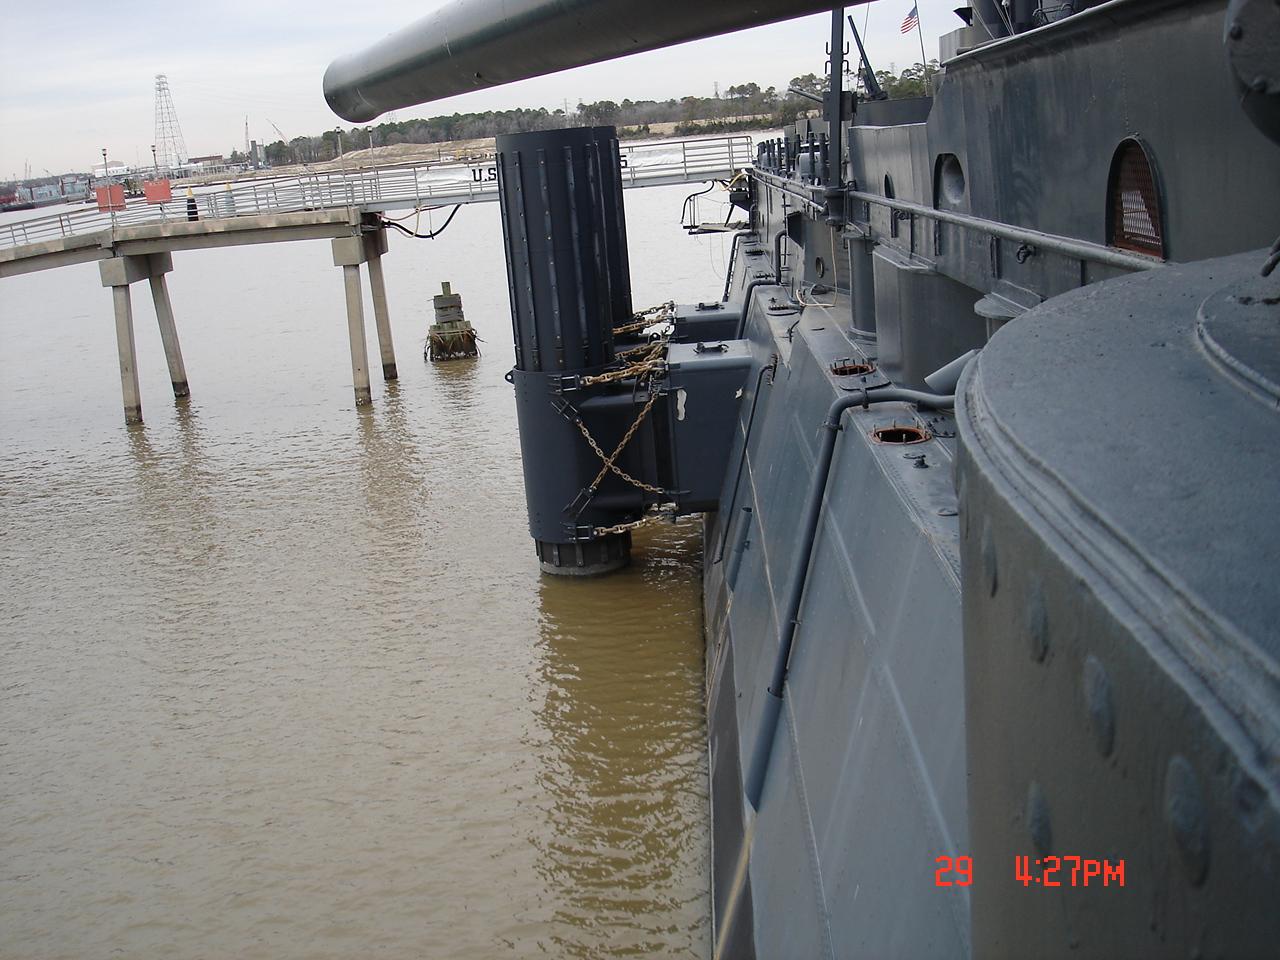 Looking out from Texas' 5in gun mount gangway, 2007